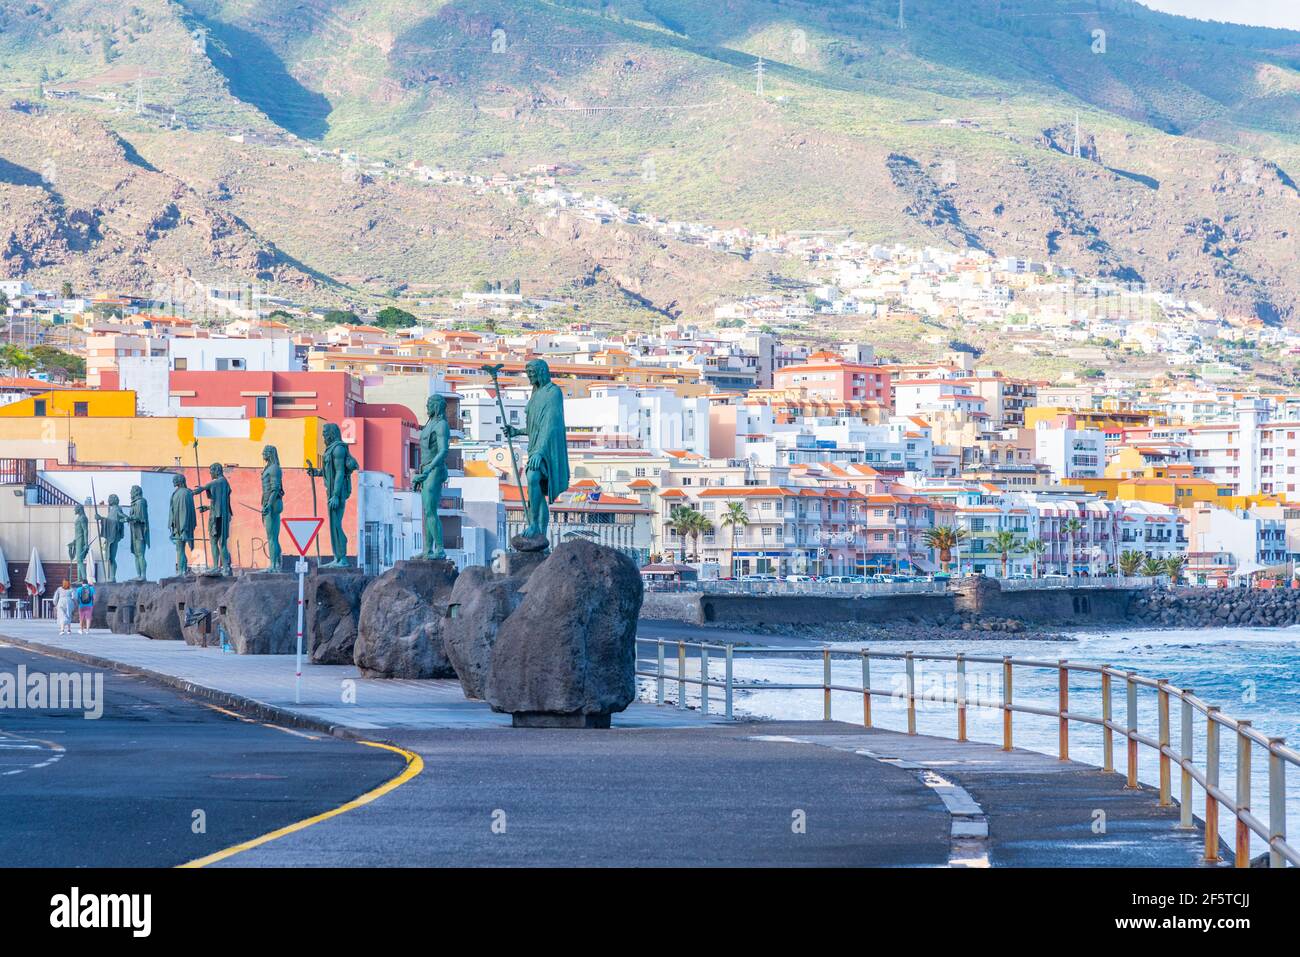 Statue of Guanche warrior at Candelaria, Tenerife, Canary islands, Spain. Stock Photo